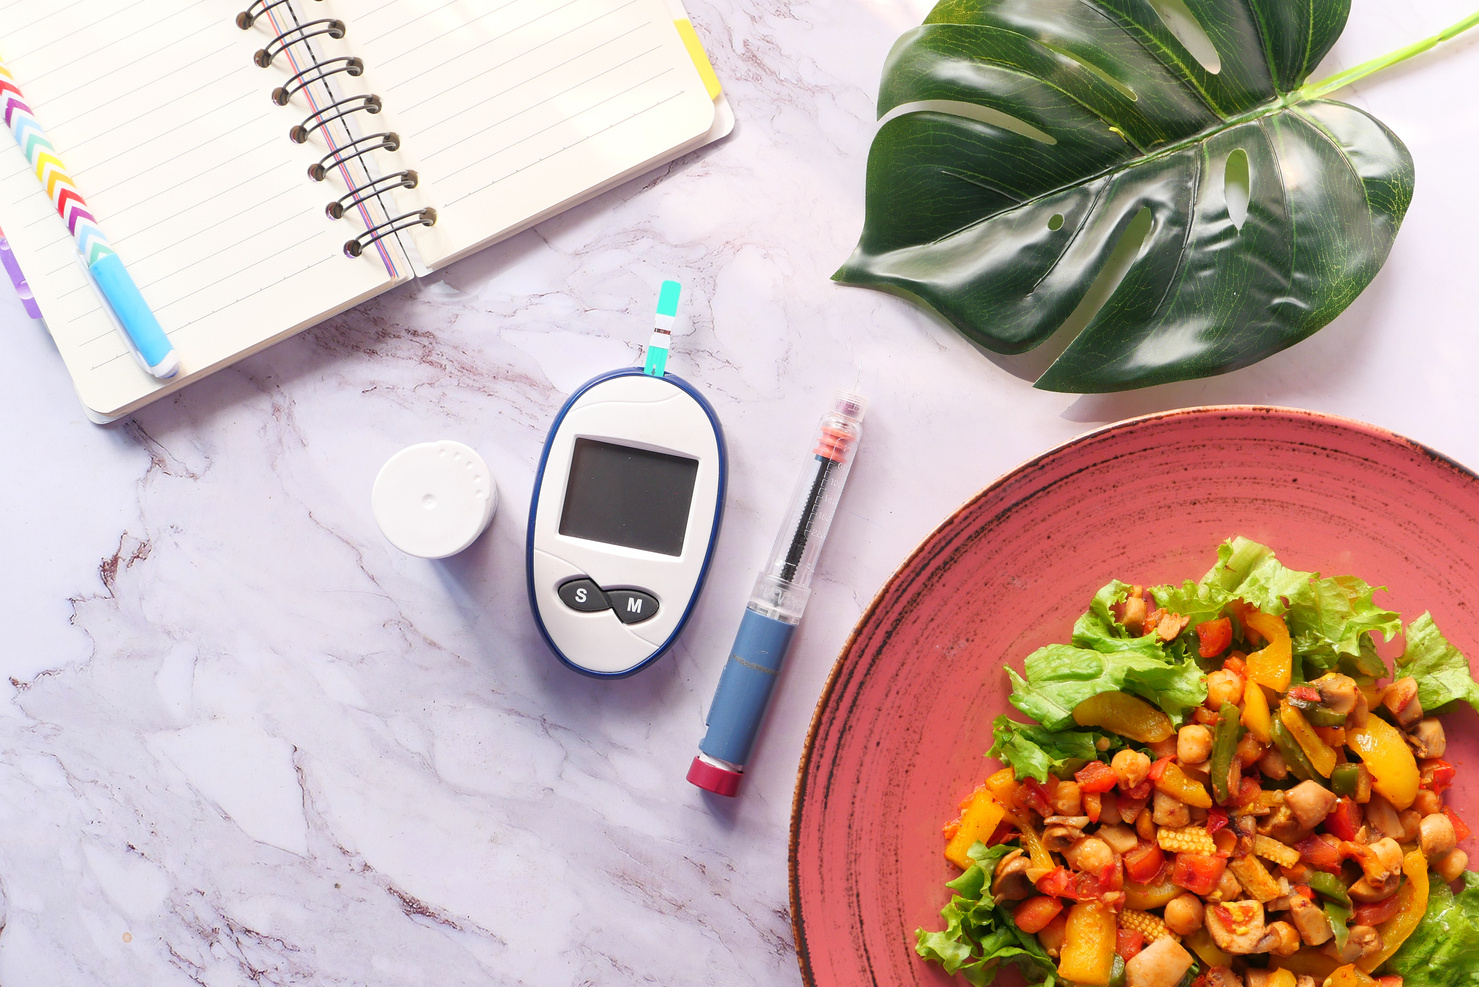 Diabetic Measurement Tools and Insulin Pen and Healthy Food on Table